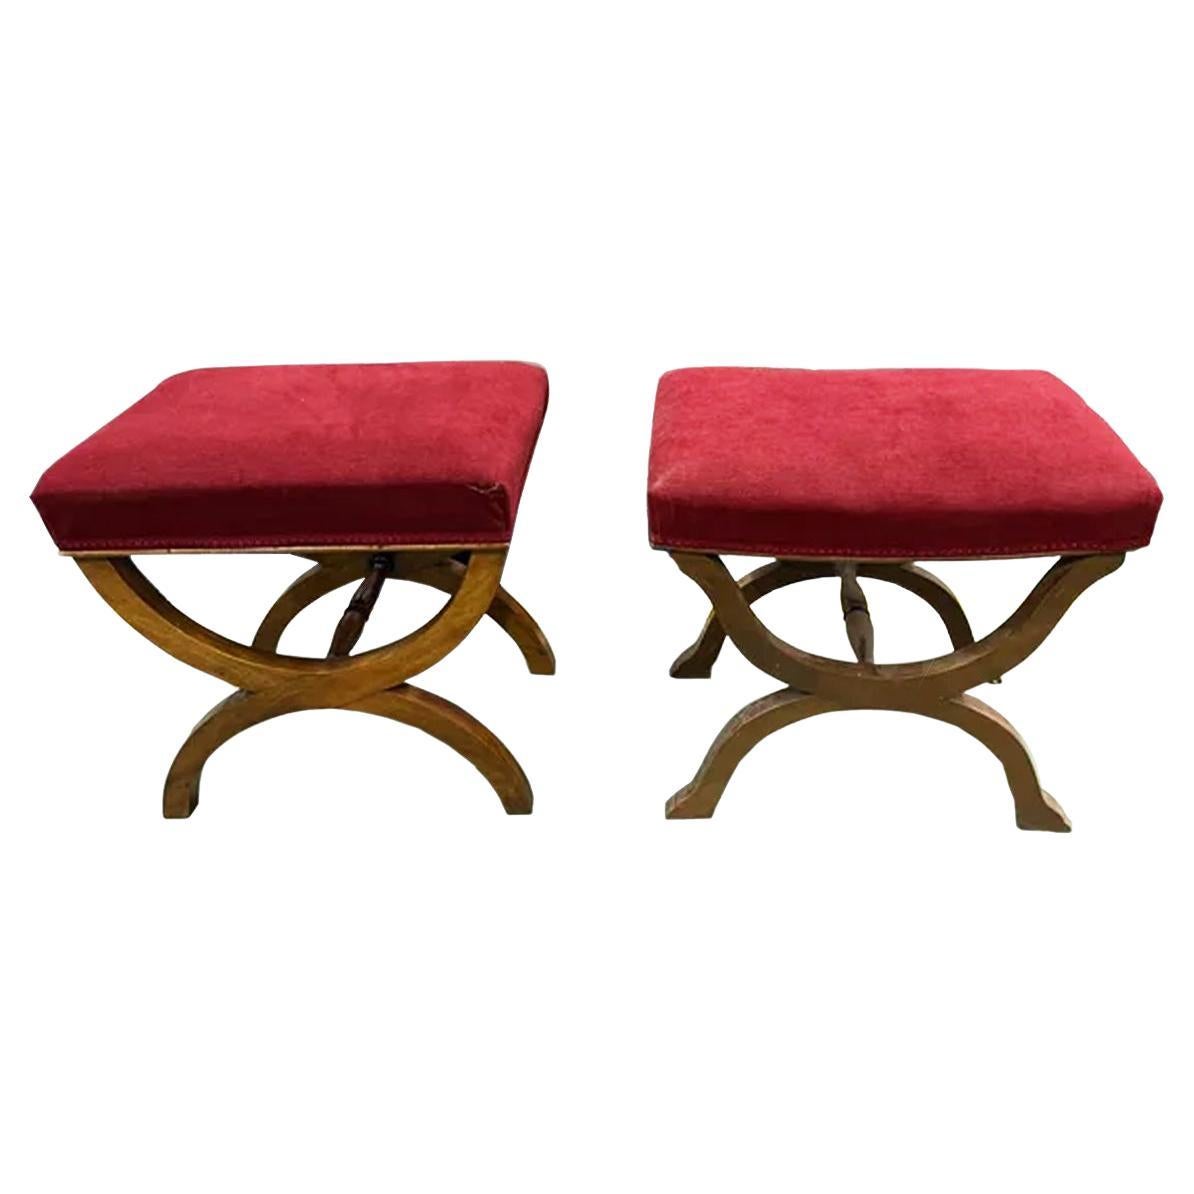 Stools Beautiful Walnut and Maroon Velvet Ottomans and Poufs